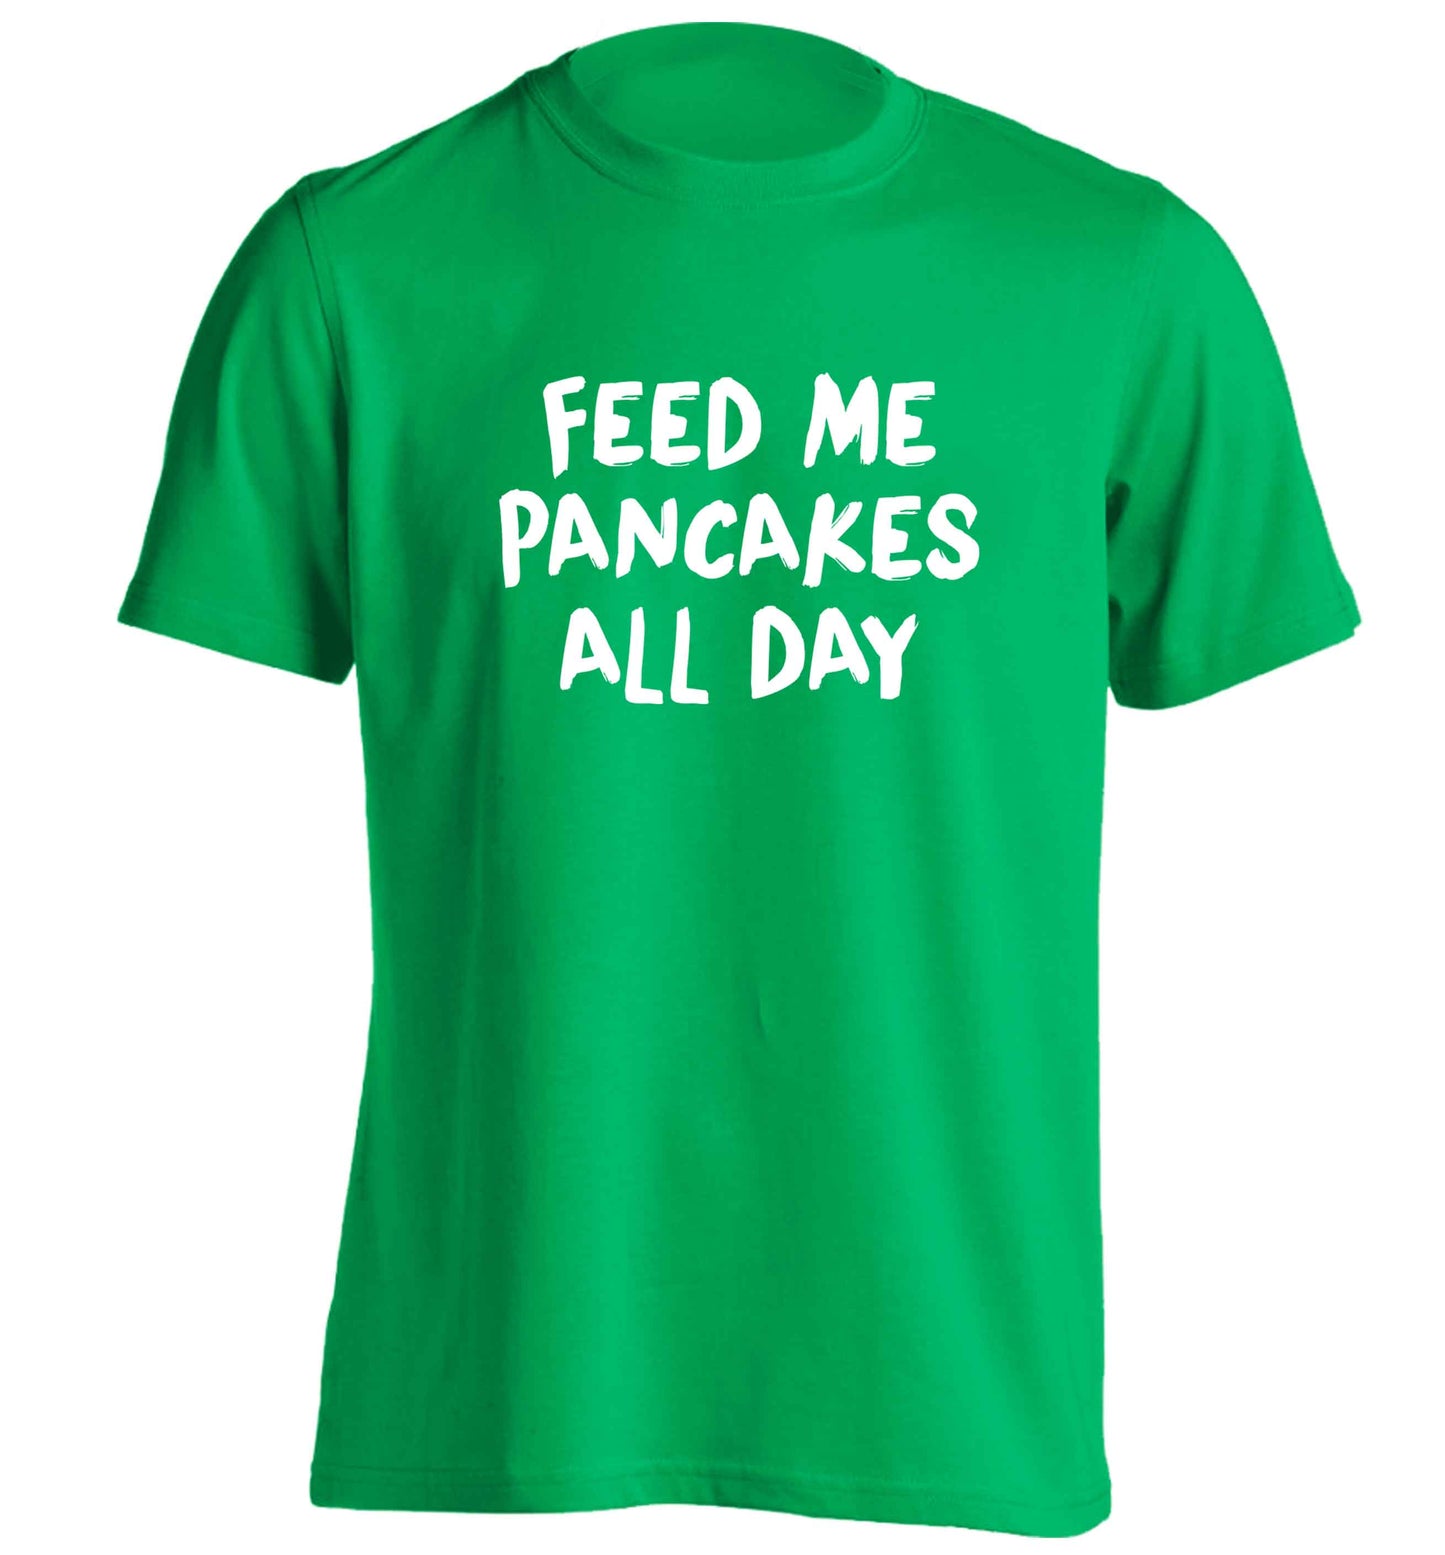 Feed me pancakes all day adults unisex green Tshirt 2XL